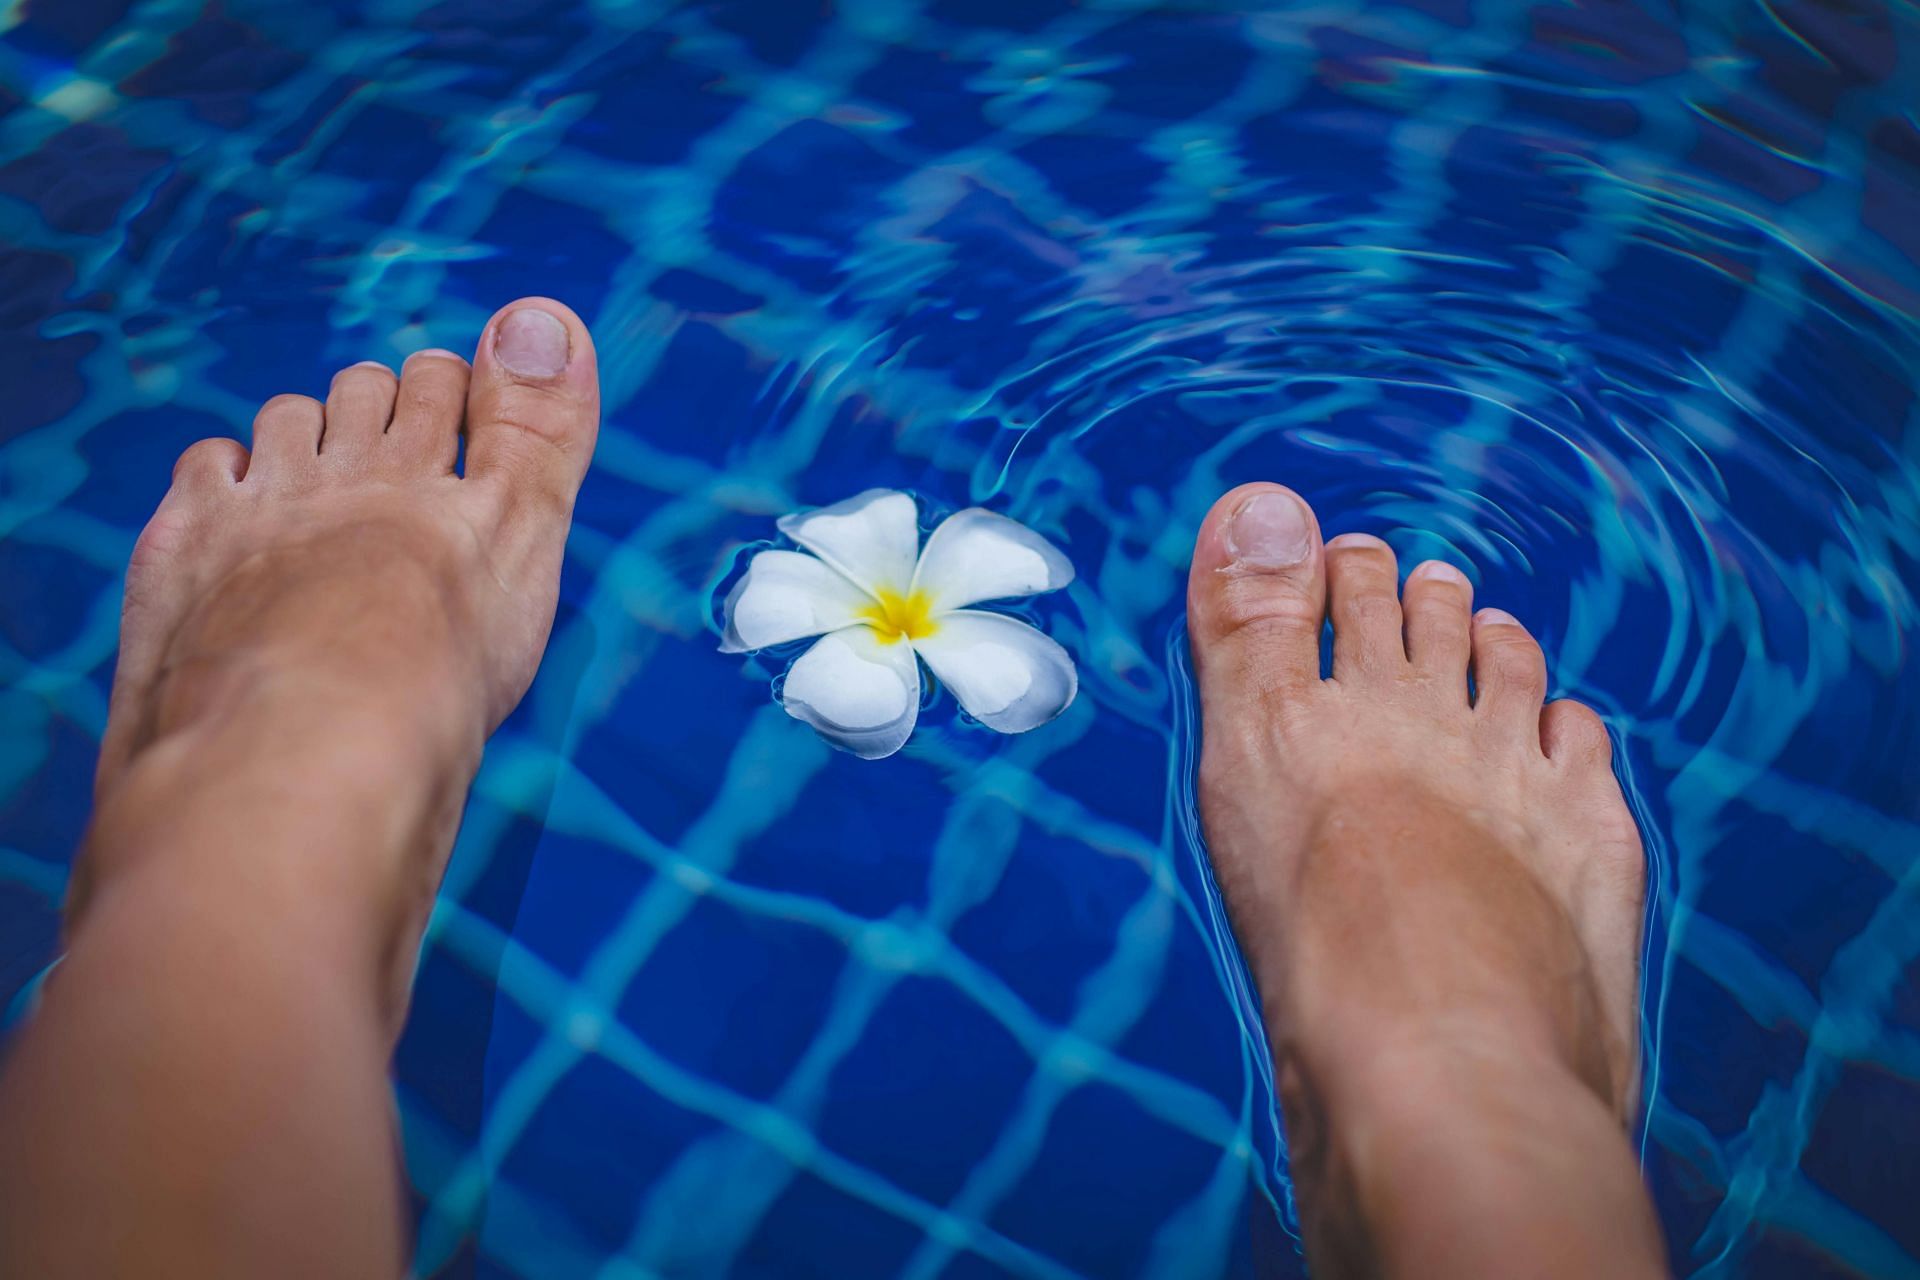 Importance of swollen toes remedies (image sourced via Pexels / Photo by valeria)